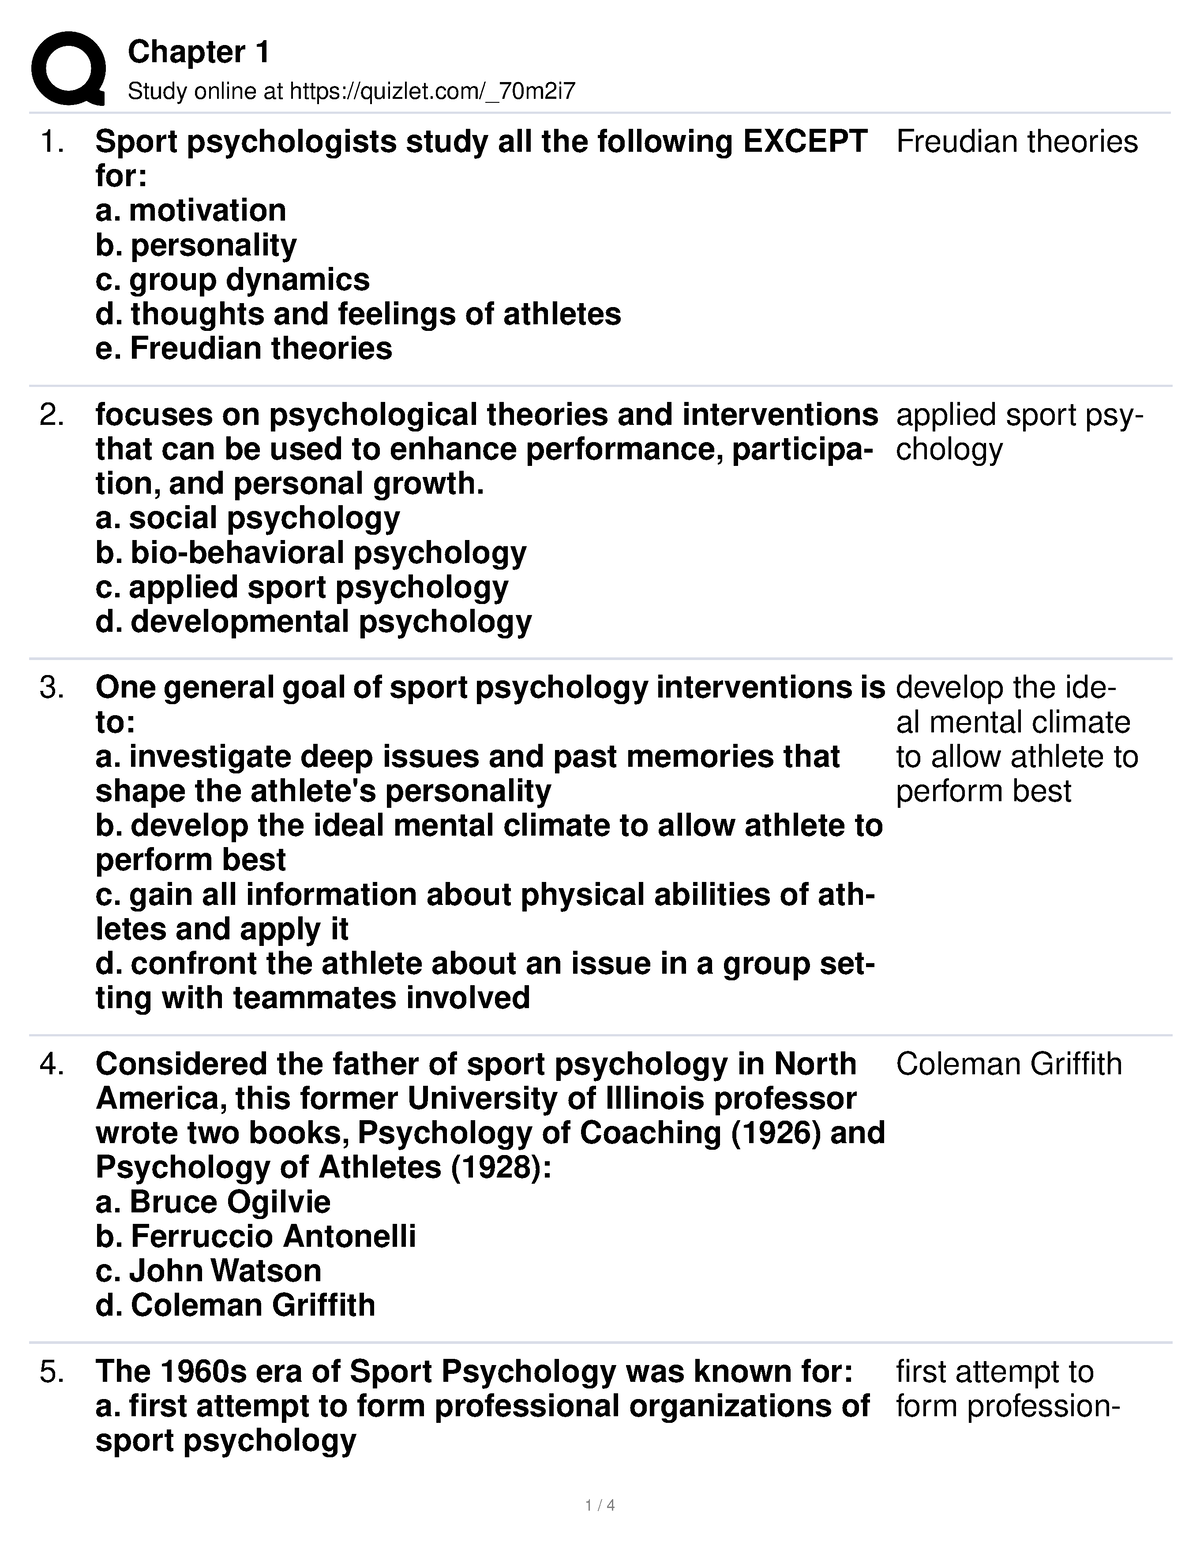 the father of sport psychology is considered to be